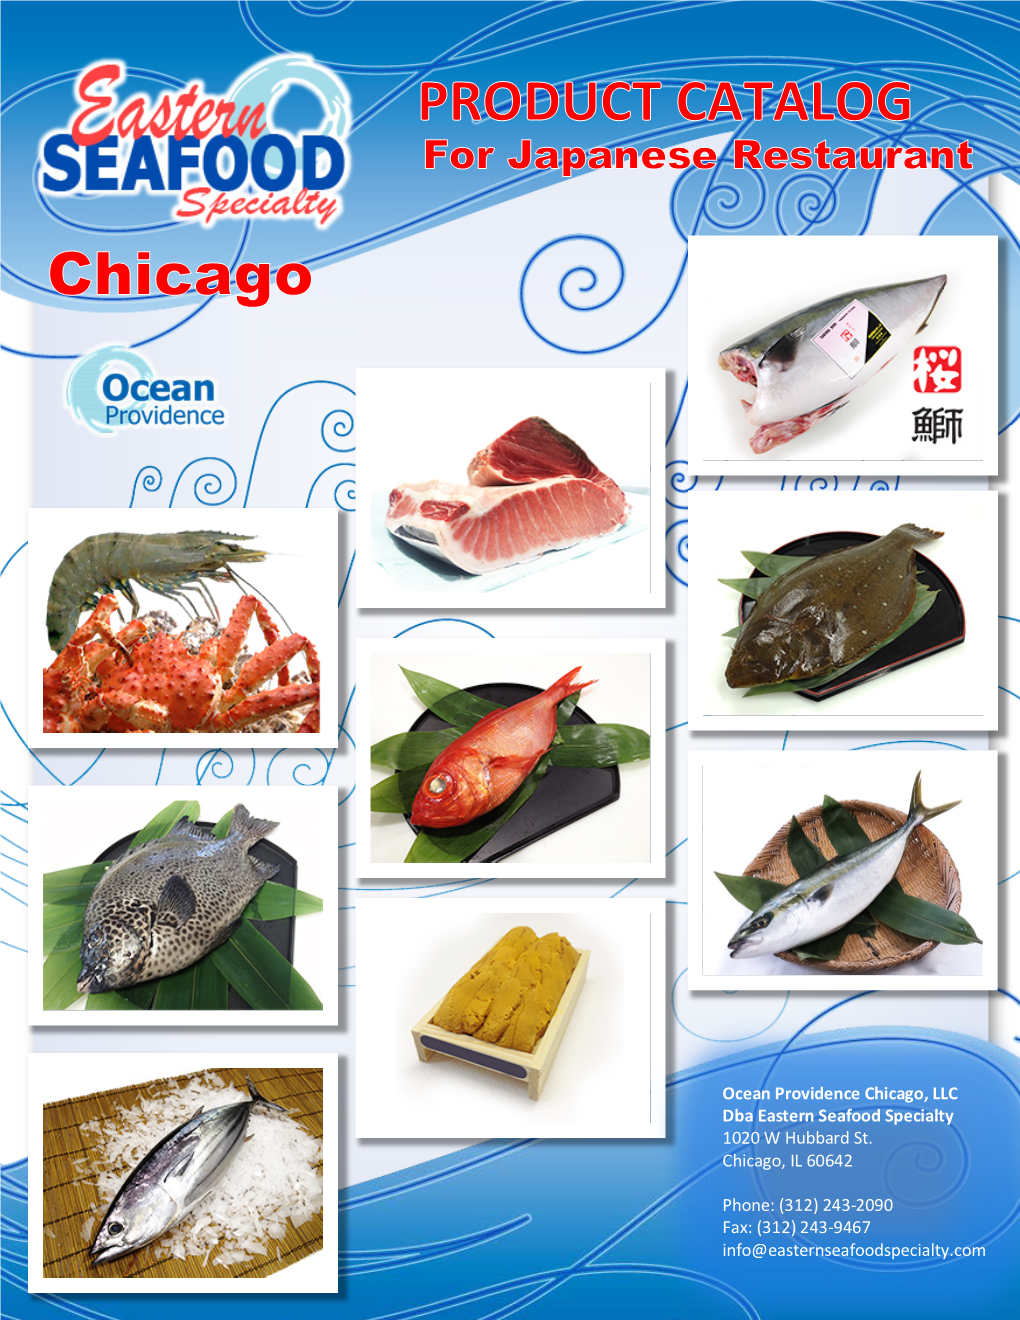 0 Ocean Providence Chicago, LLC Dba Eastern Seafood Specialty 1020 W Hubbard St. Chicago, IL 60642 Phone: (312) 243-2090 Fax: (